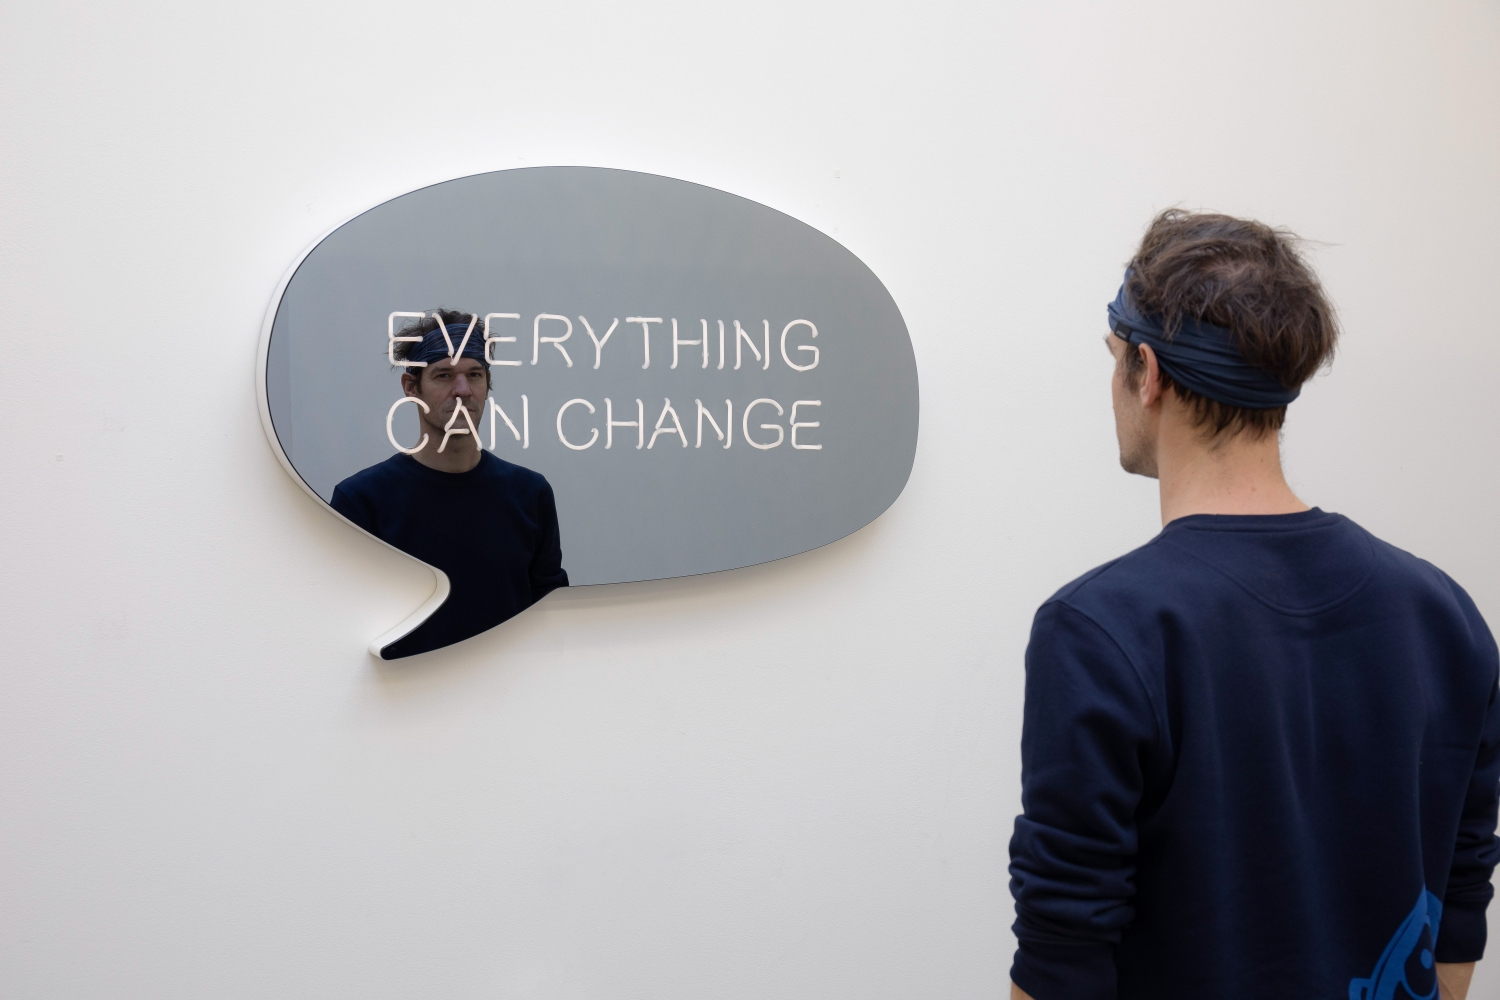 Jeppe Hein

EVERYTHING CAN CHANGE (speech bubble)

2021

Powder-coated aluminum, neon tubes, two-way mirror, powder-coated steel, transformers

29 1/8 x 42 1/8 x 2 3/4 inches (74 x 107 x 7 cm)

Edition of 3, with 2AP

JH 603

&amp;nbsp;

INQUIRE